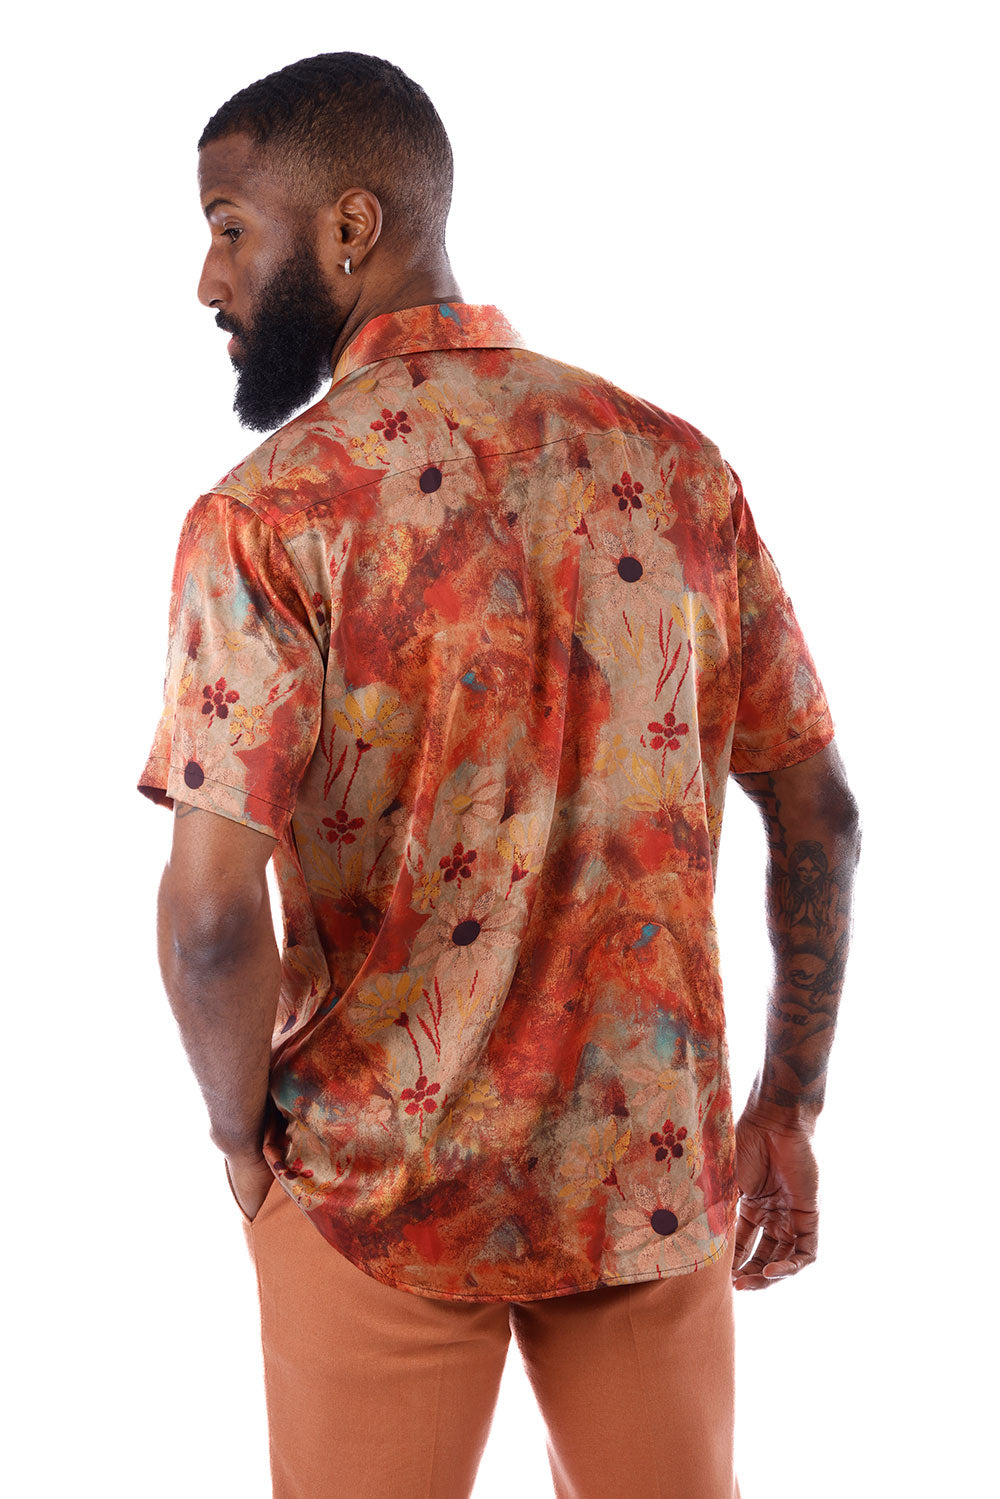 BARABAS Men's Colorful Floral Button Down Short Sleeve Shirts 4sst21 Rust